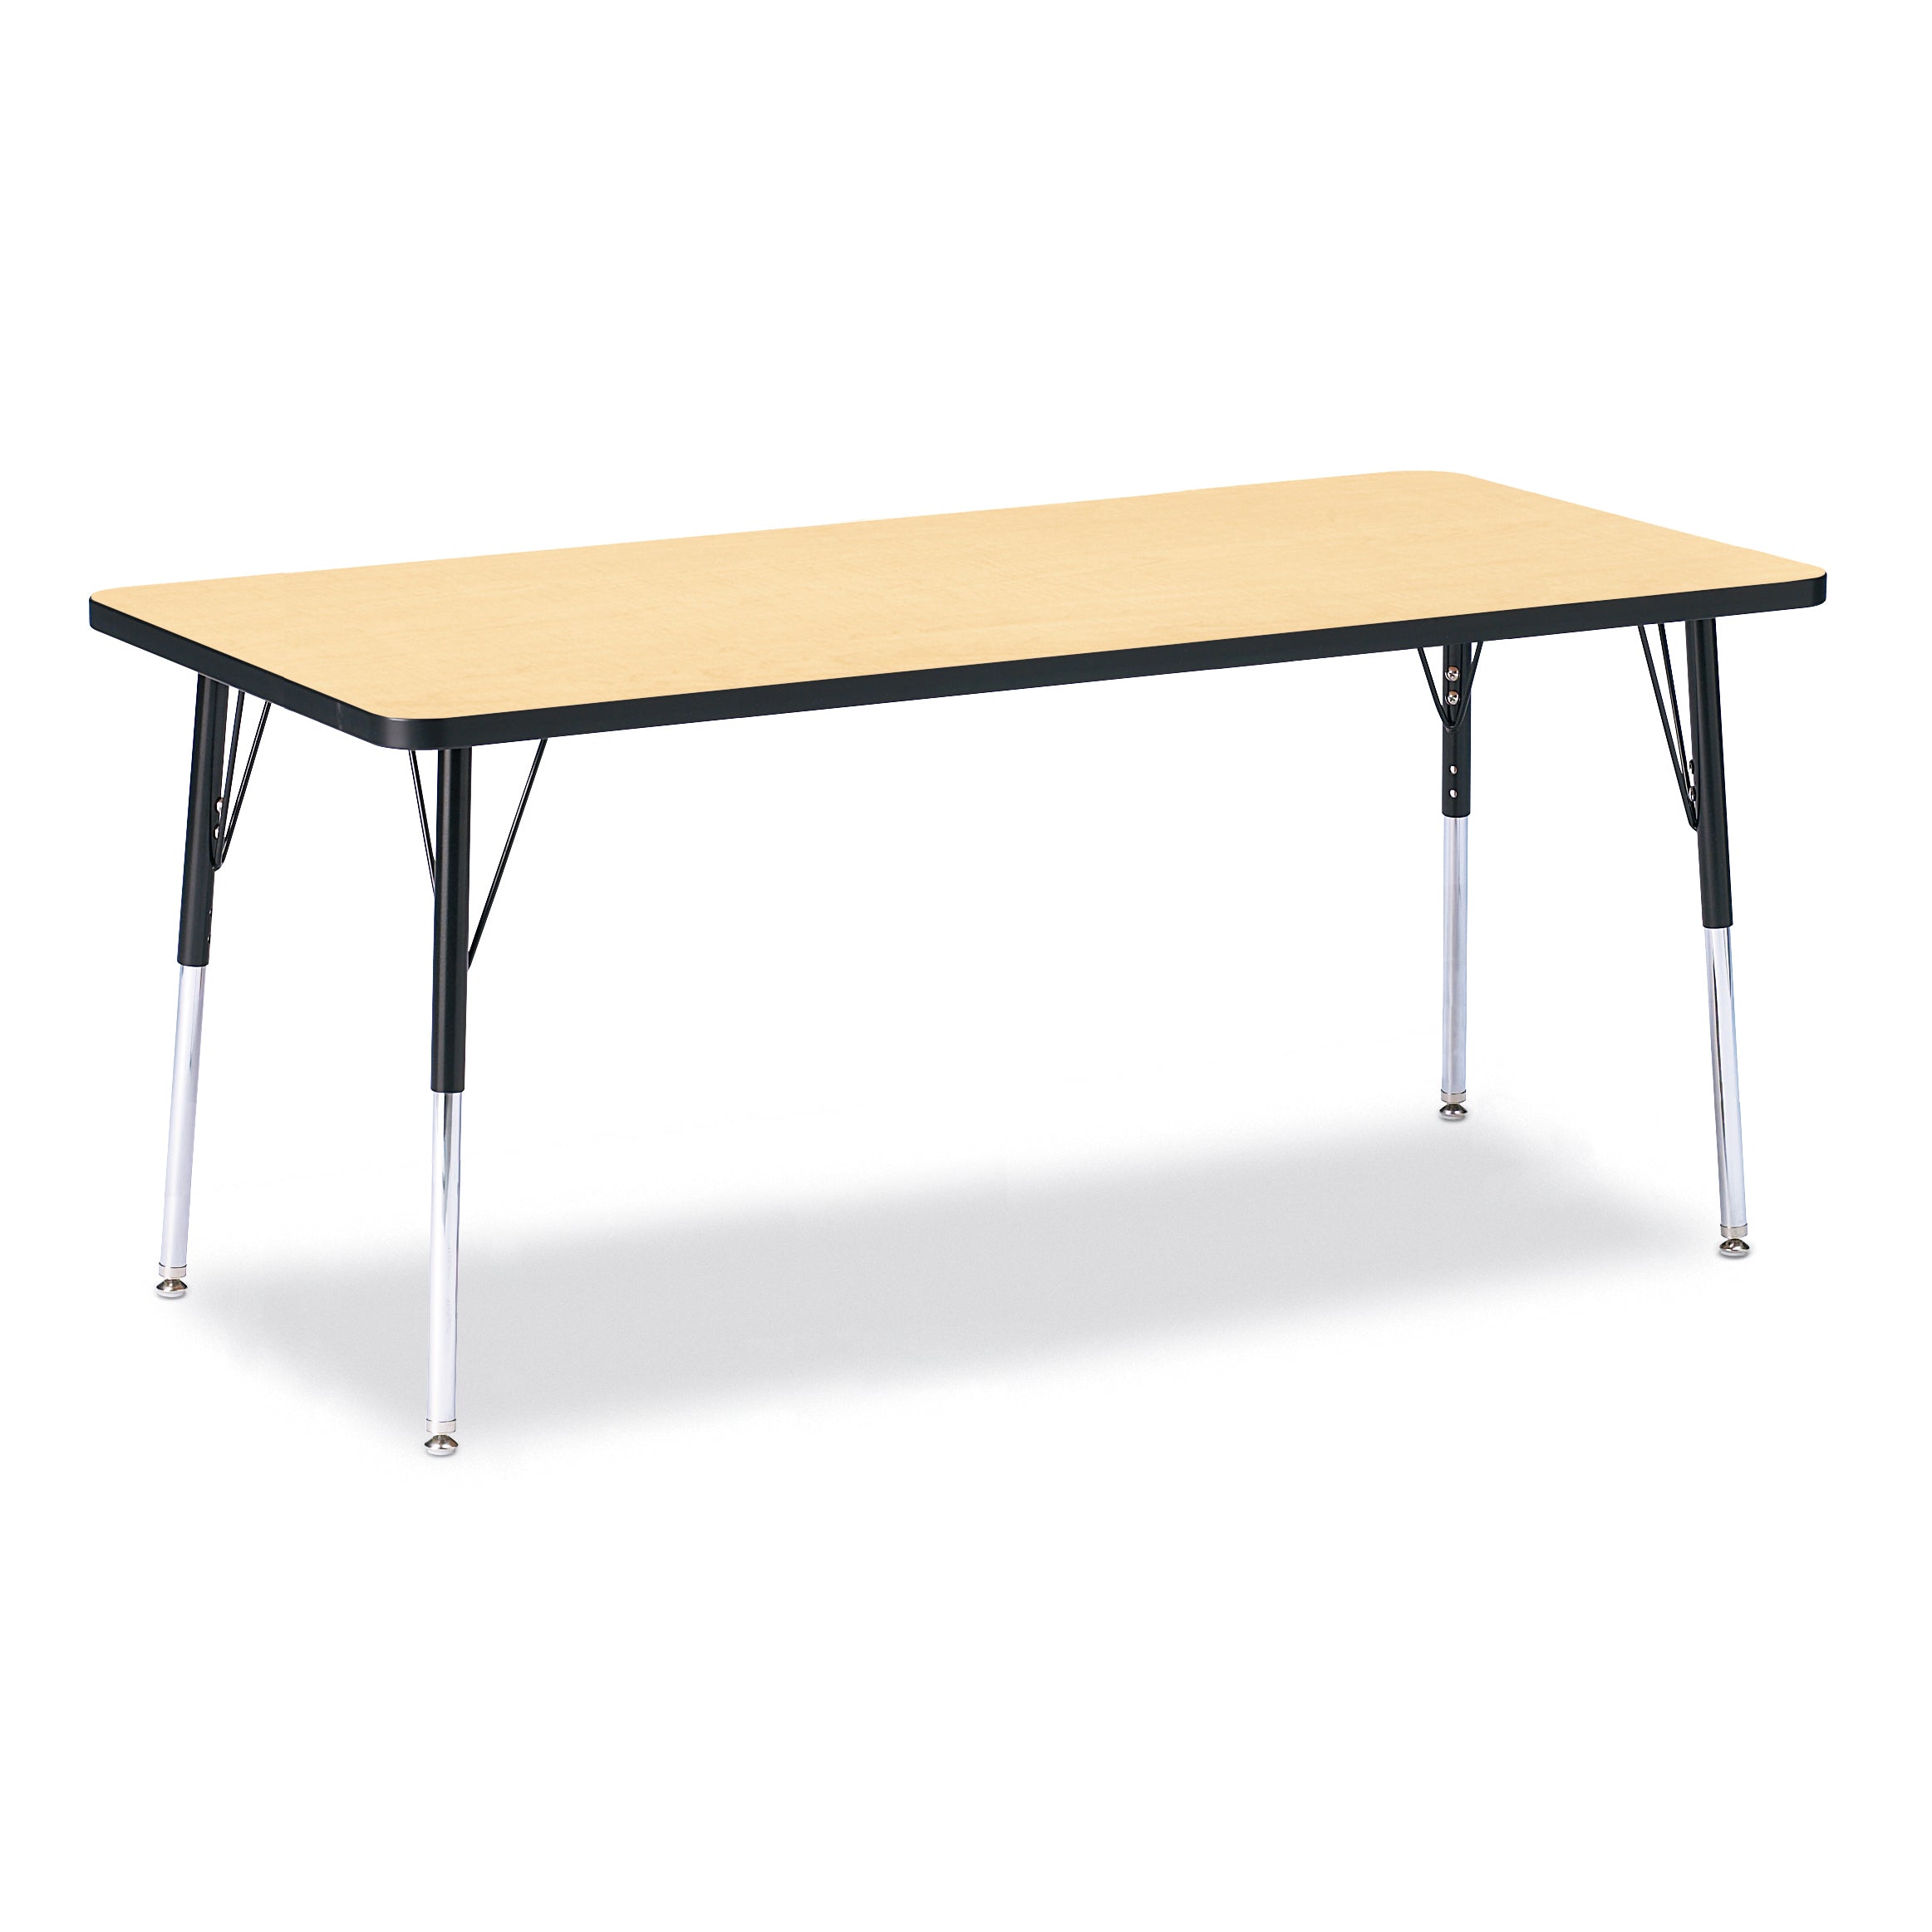 6413JCA011, Berries Rectangle Activity Table - 30" X 72", A-height - Maple/Black/Black